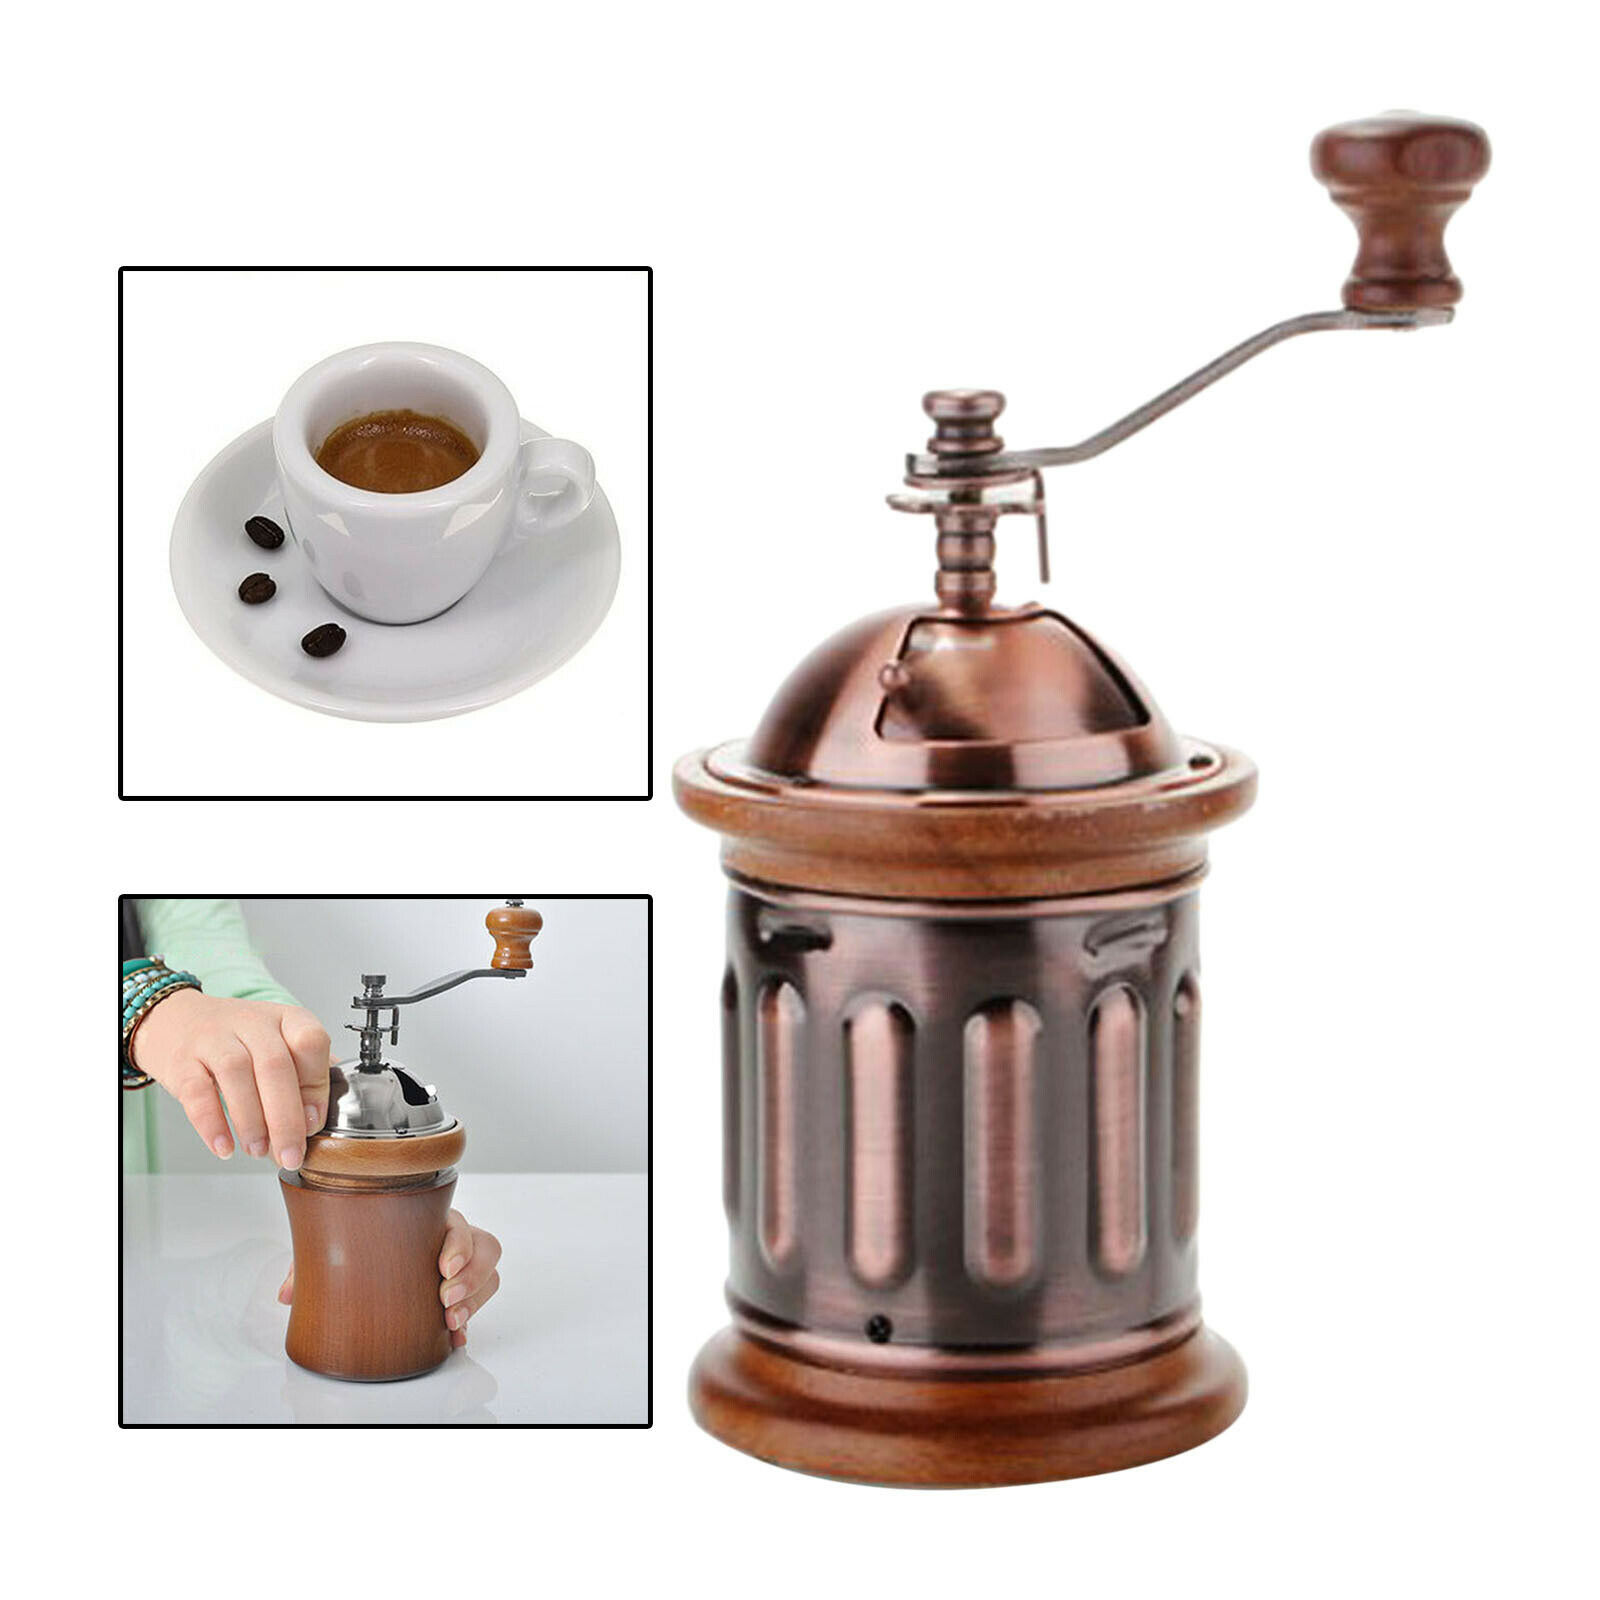 Creative Manual Coffee Grinder Portable Travel Camping Coffee Grinder For